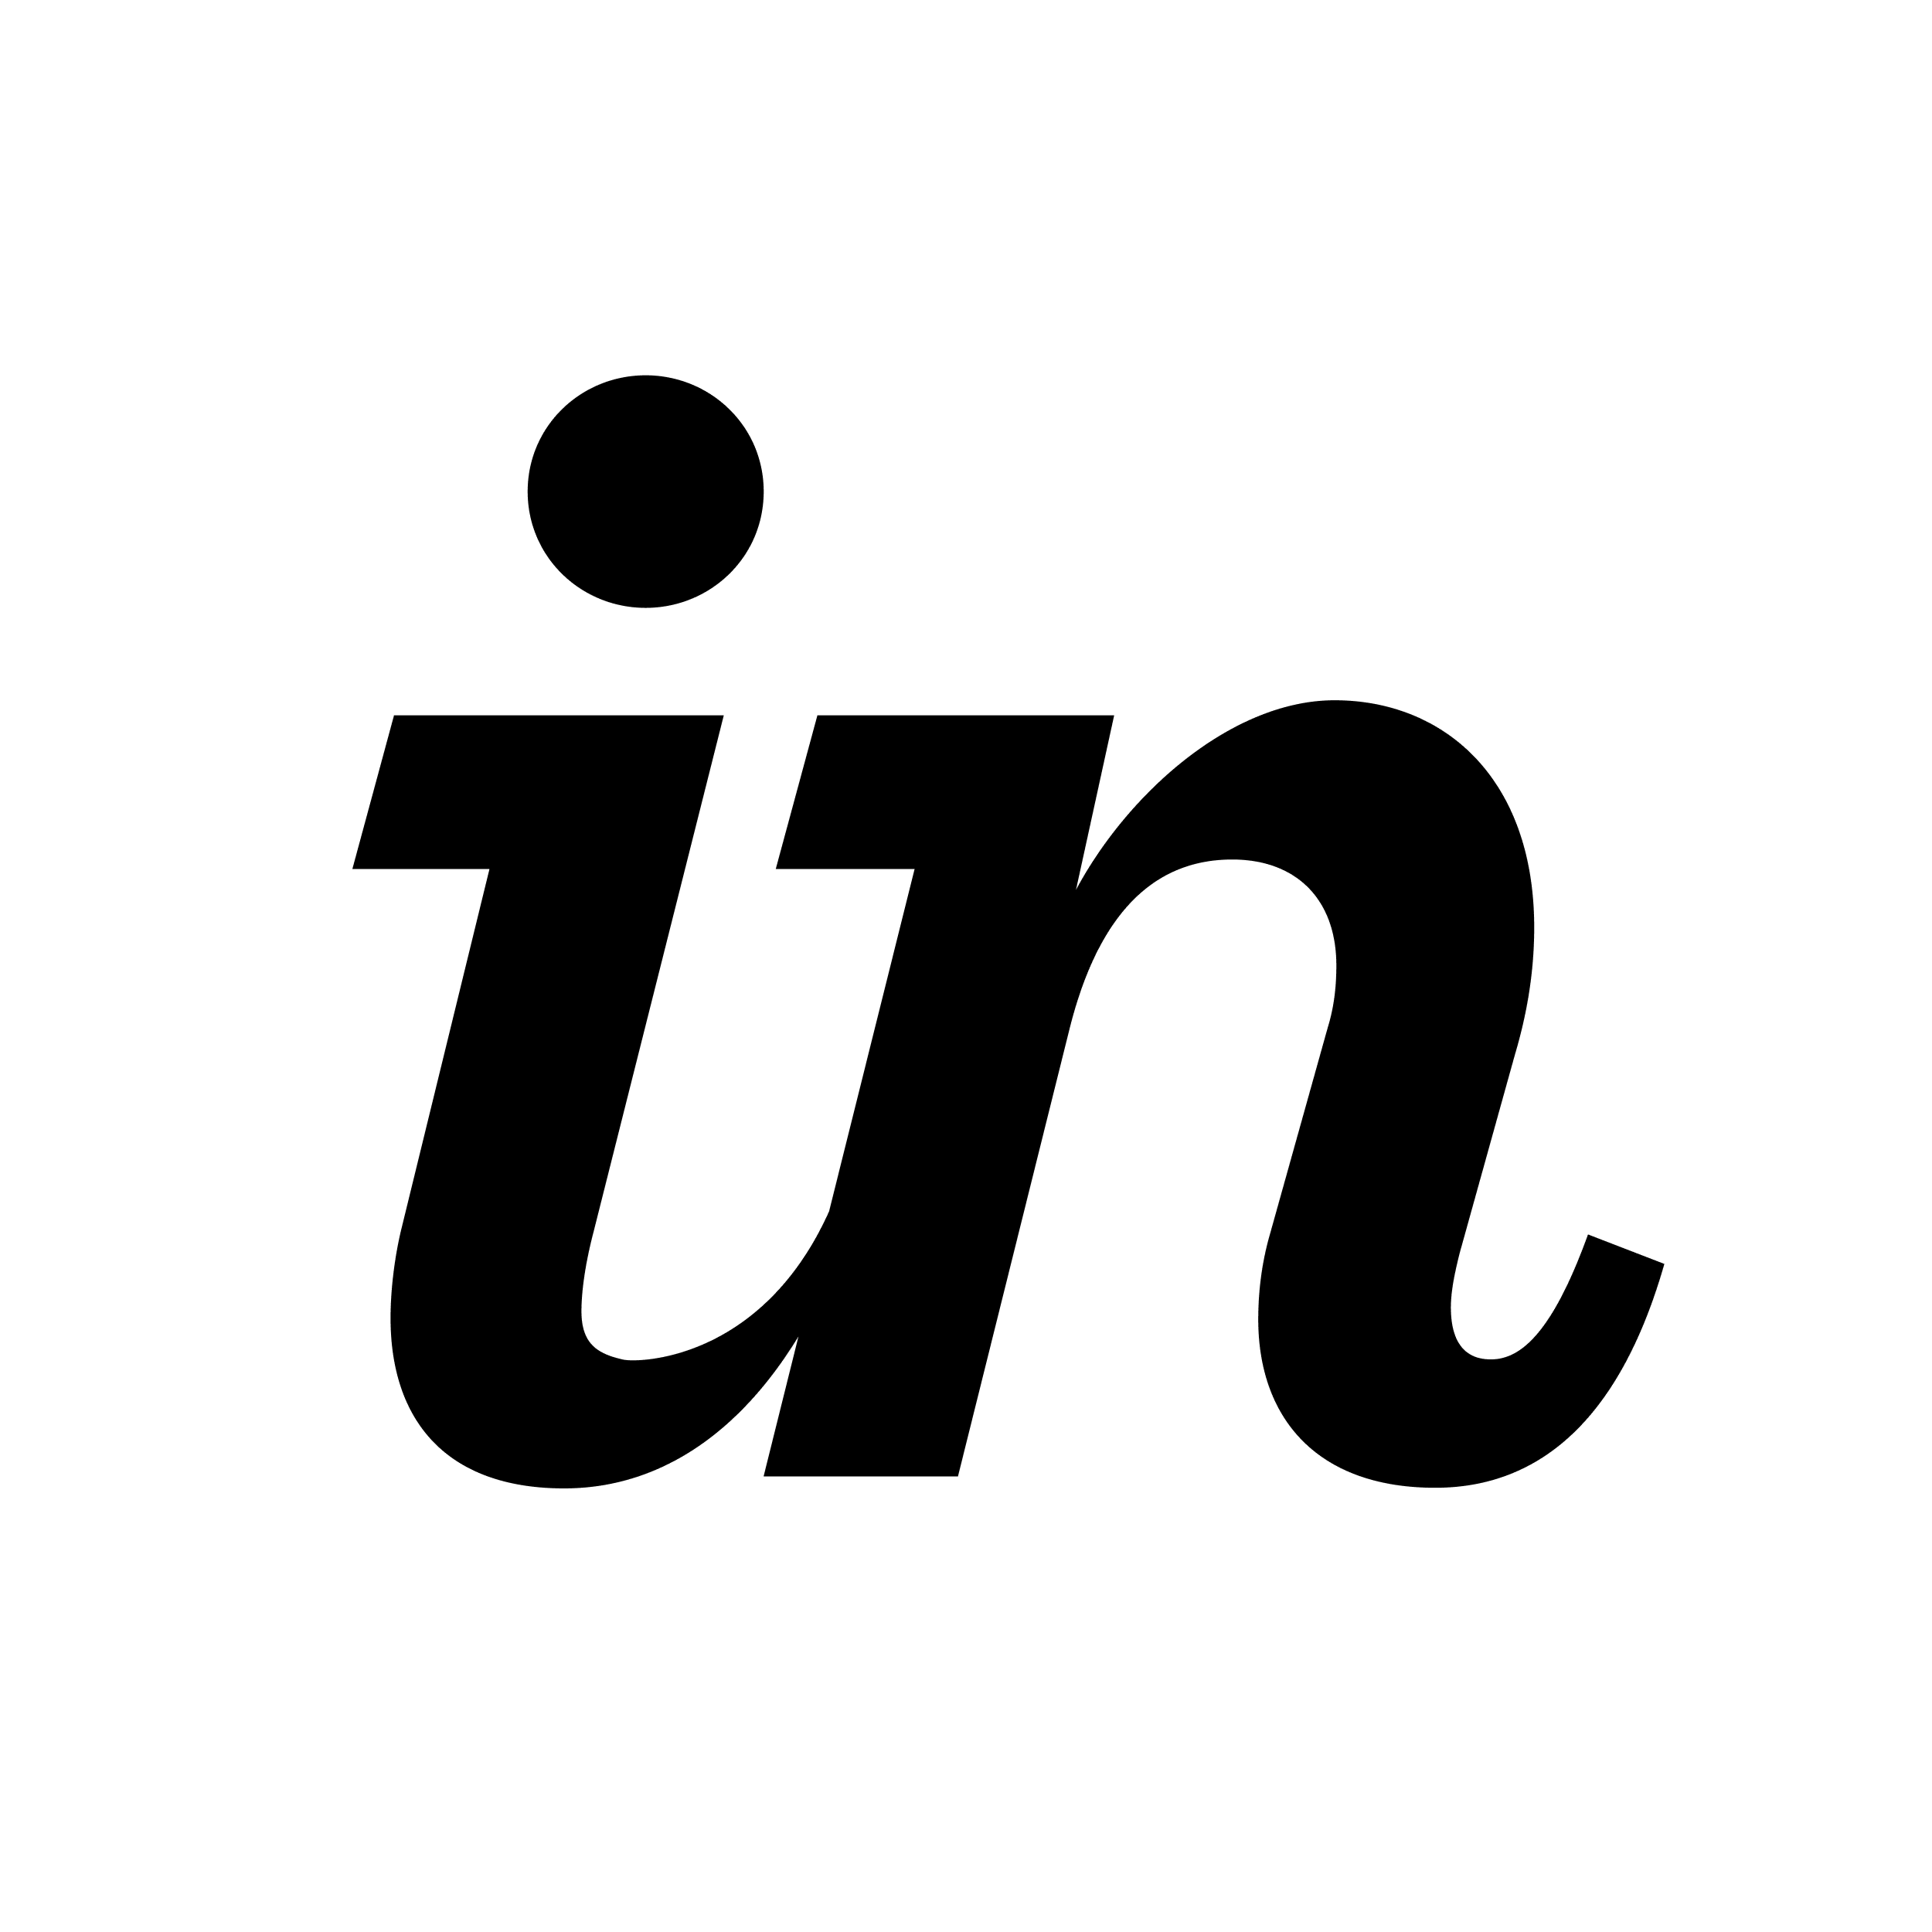 Picture of the Invision logo.